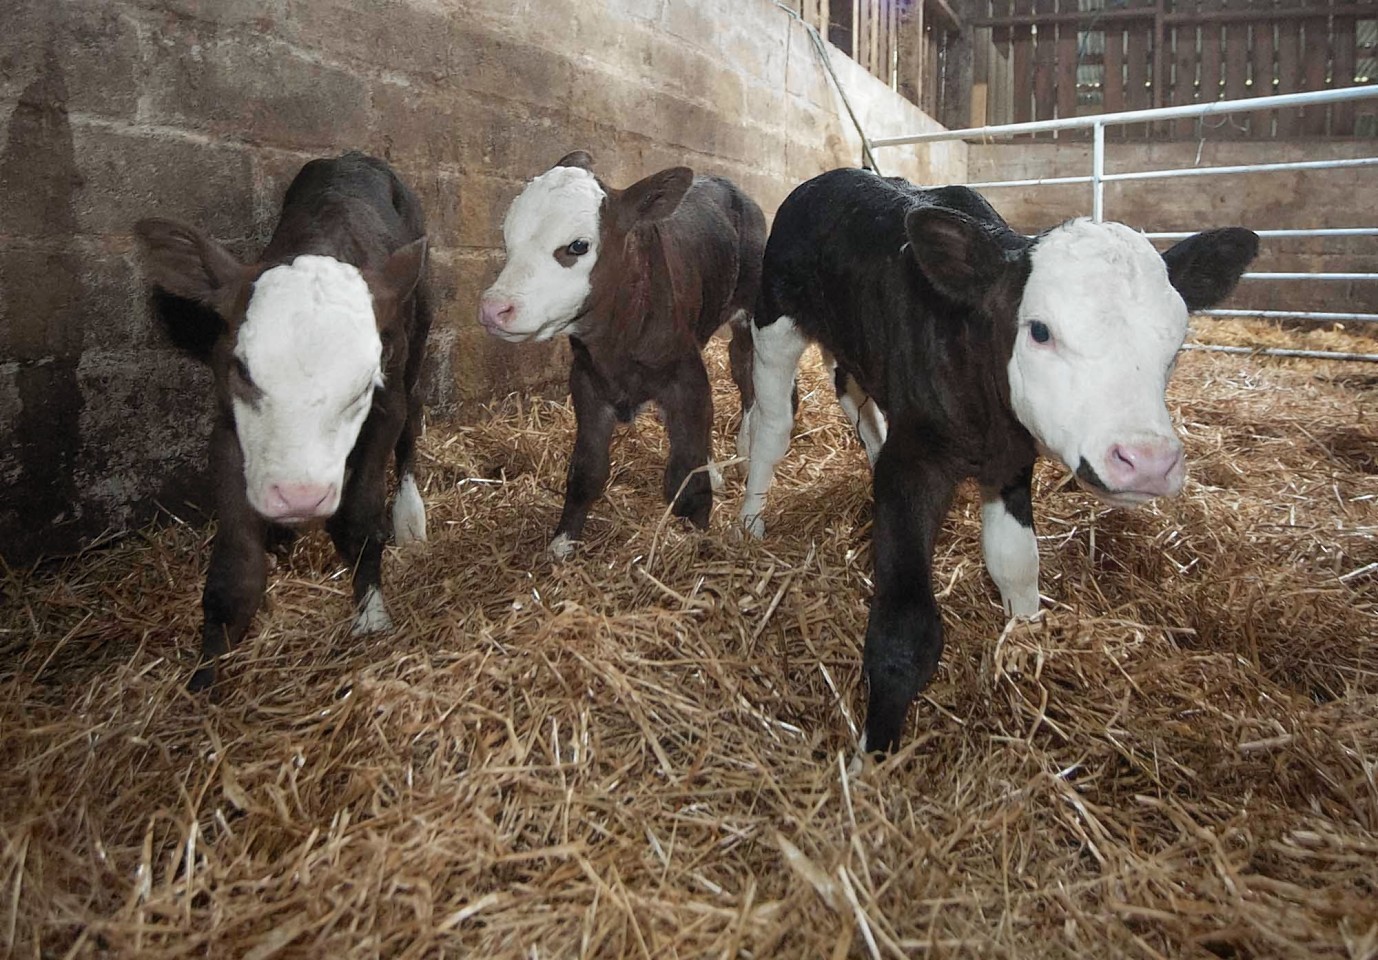 A cow belonging to George and Norma Mackie of Ballater has given birth to triplets